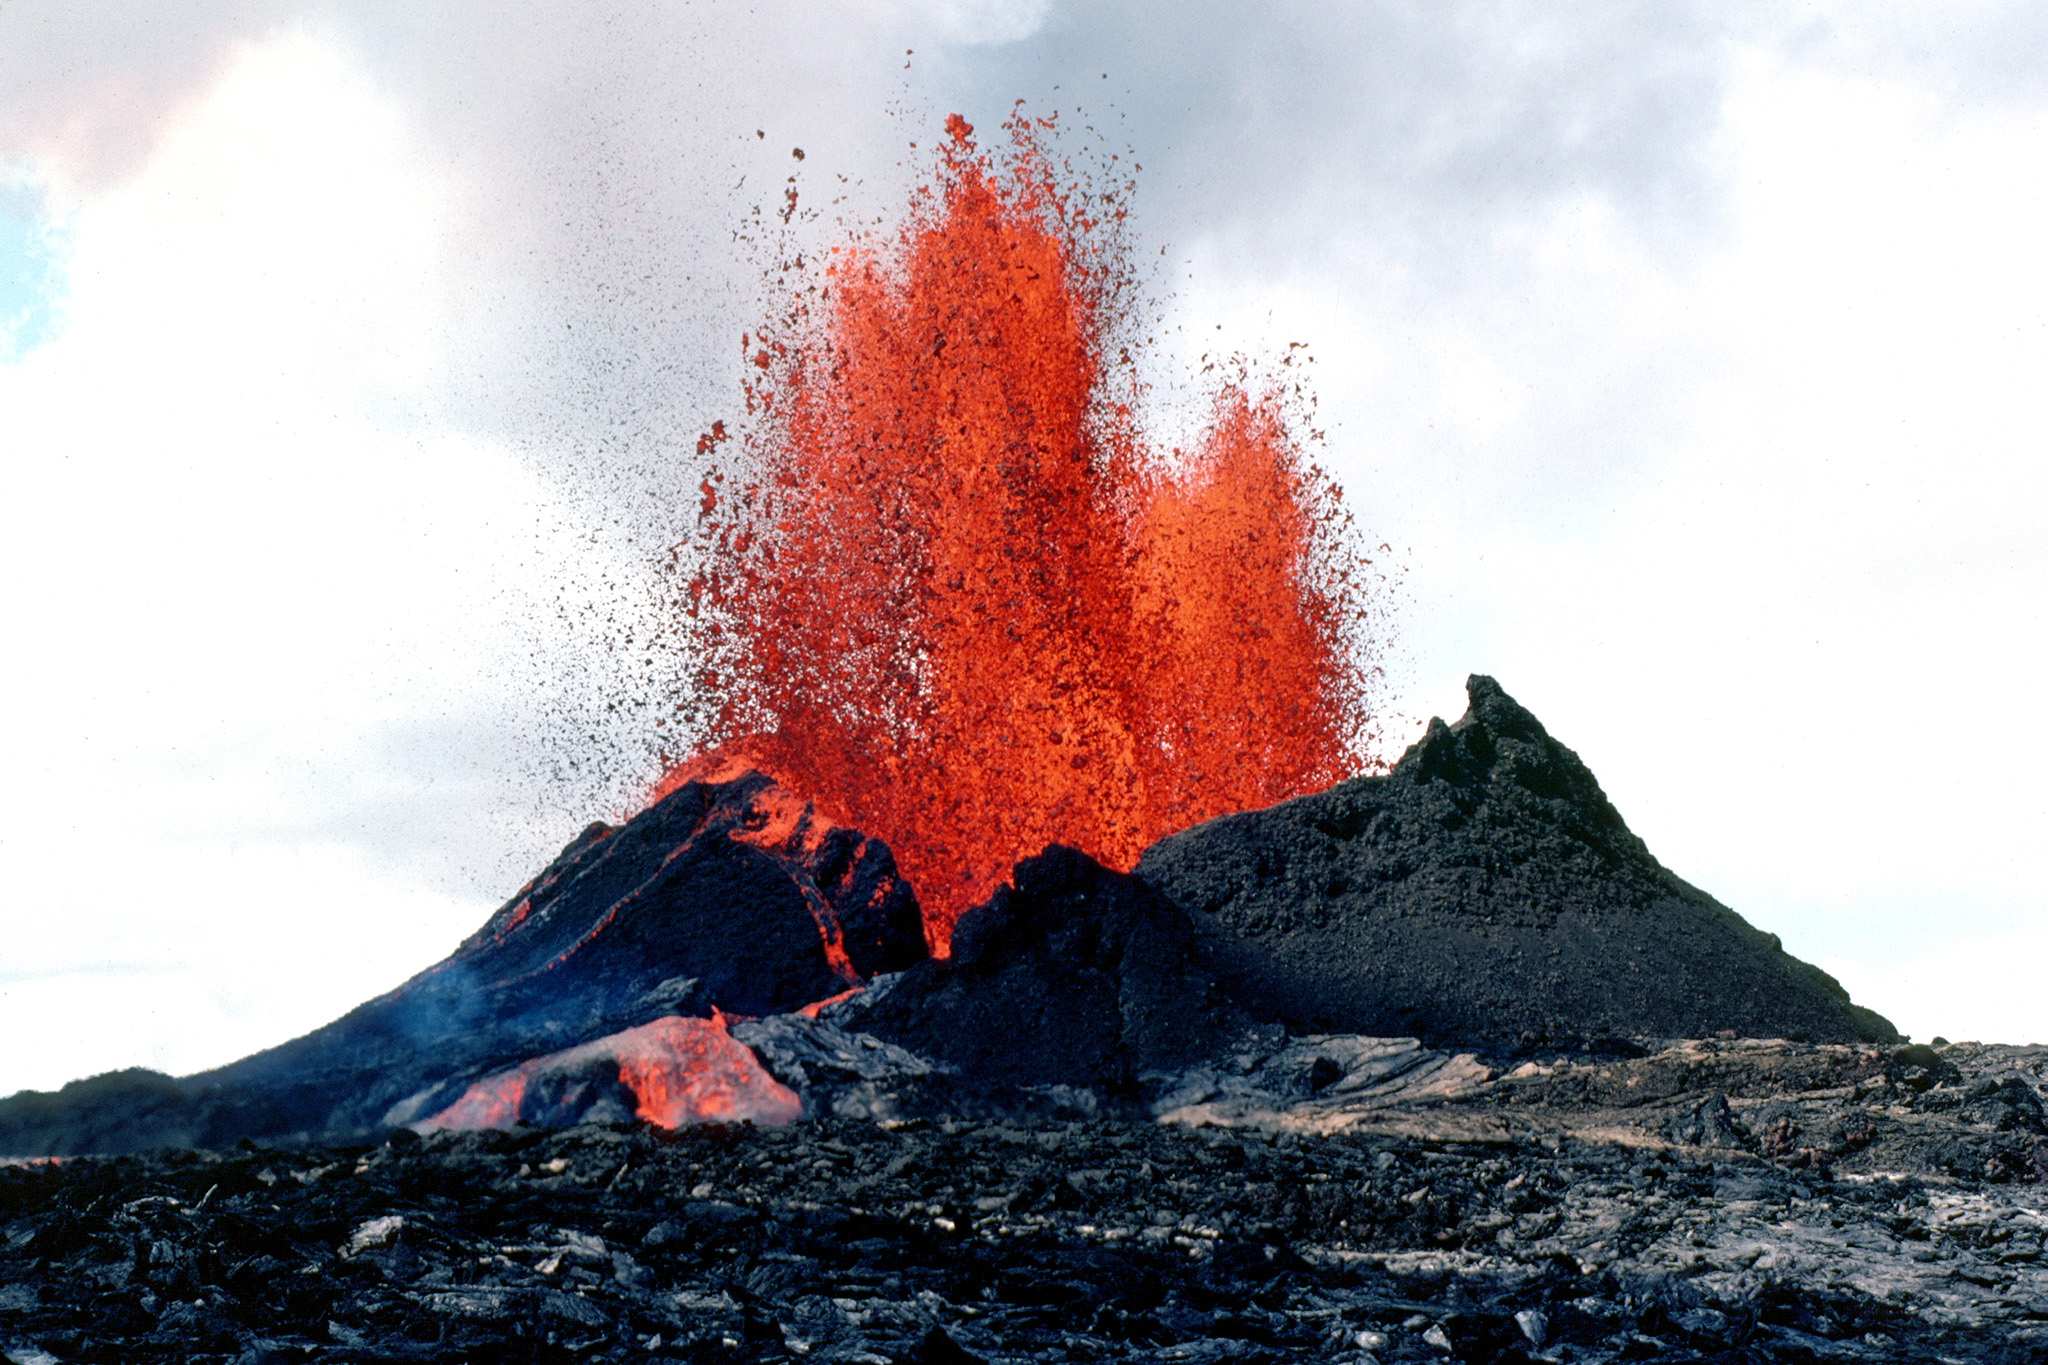 What it’s like to hike Hawaii’s most active volcano